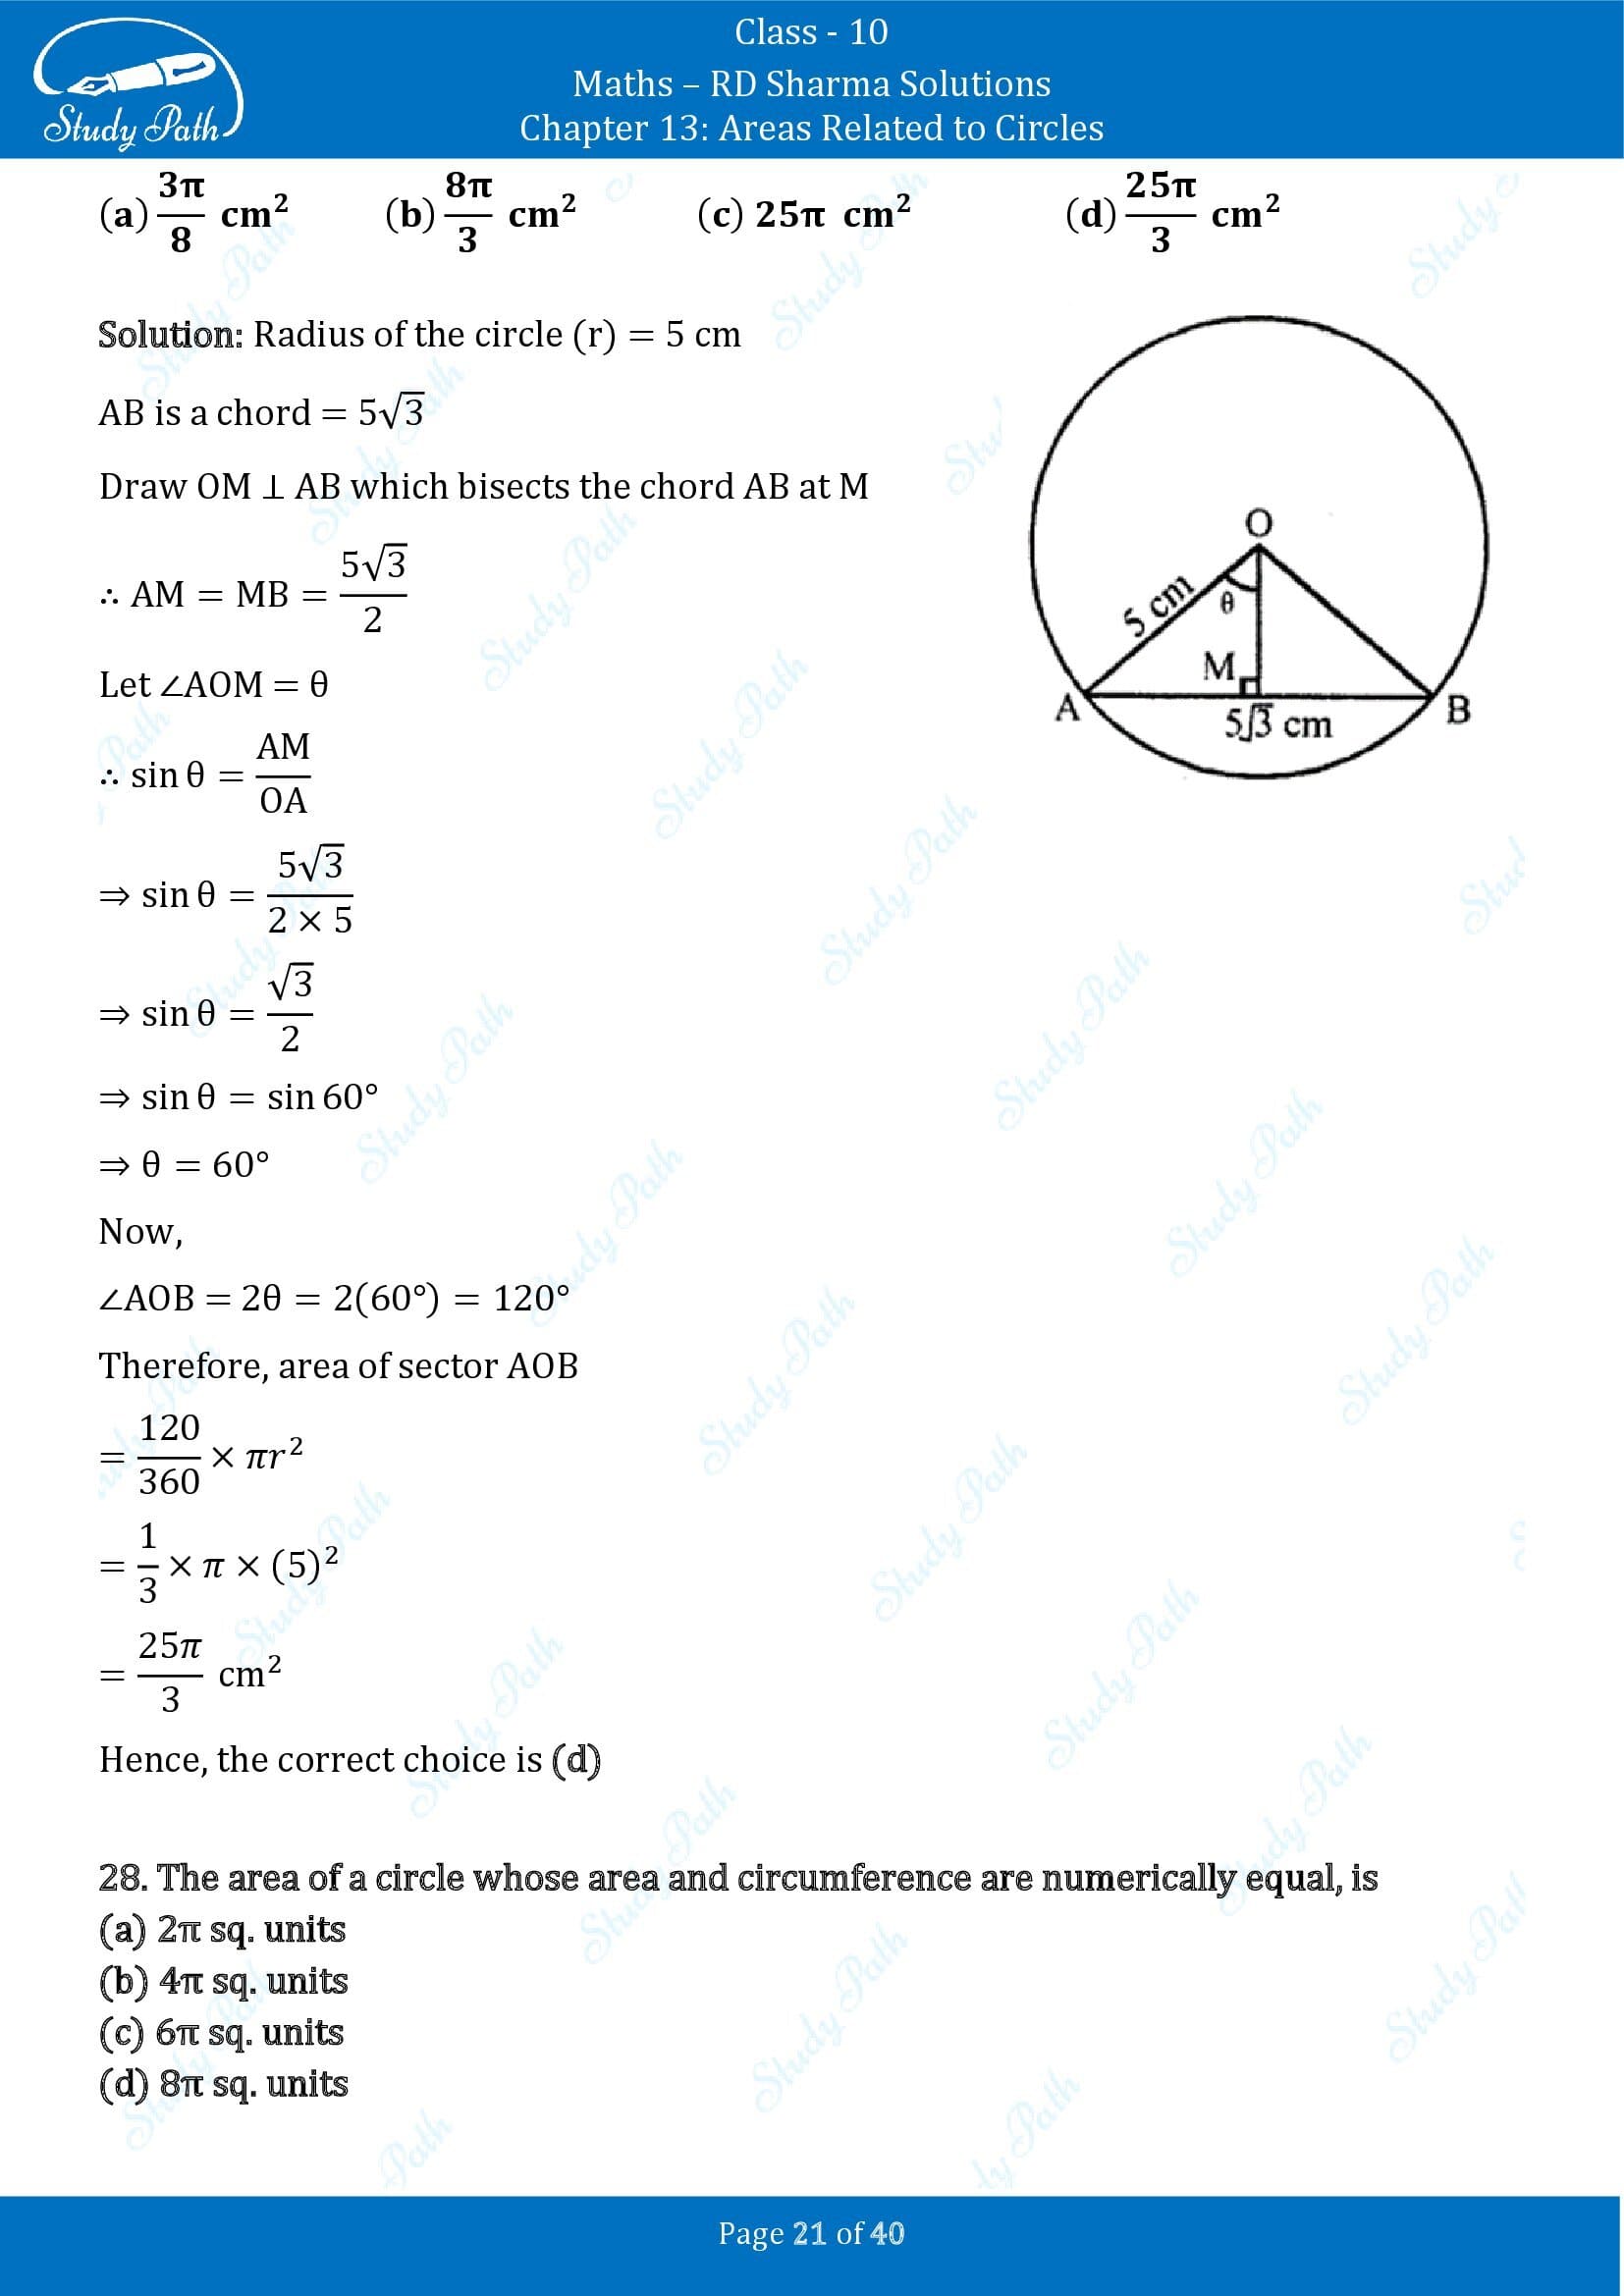 RD Sharma Solutions Class 10 Chapter 13 Areas Related to Circles Multiple Choice Question MCQs 00021